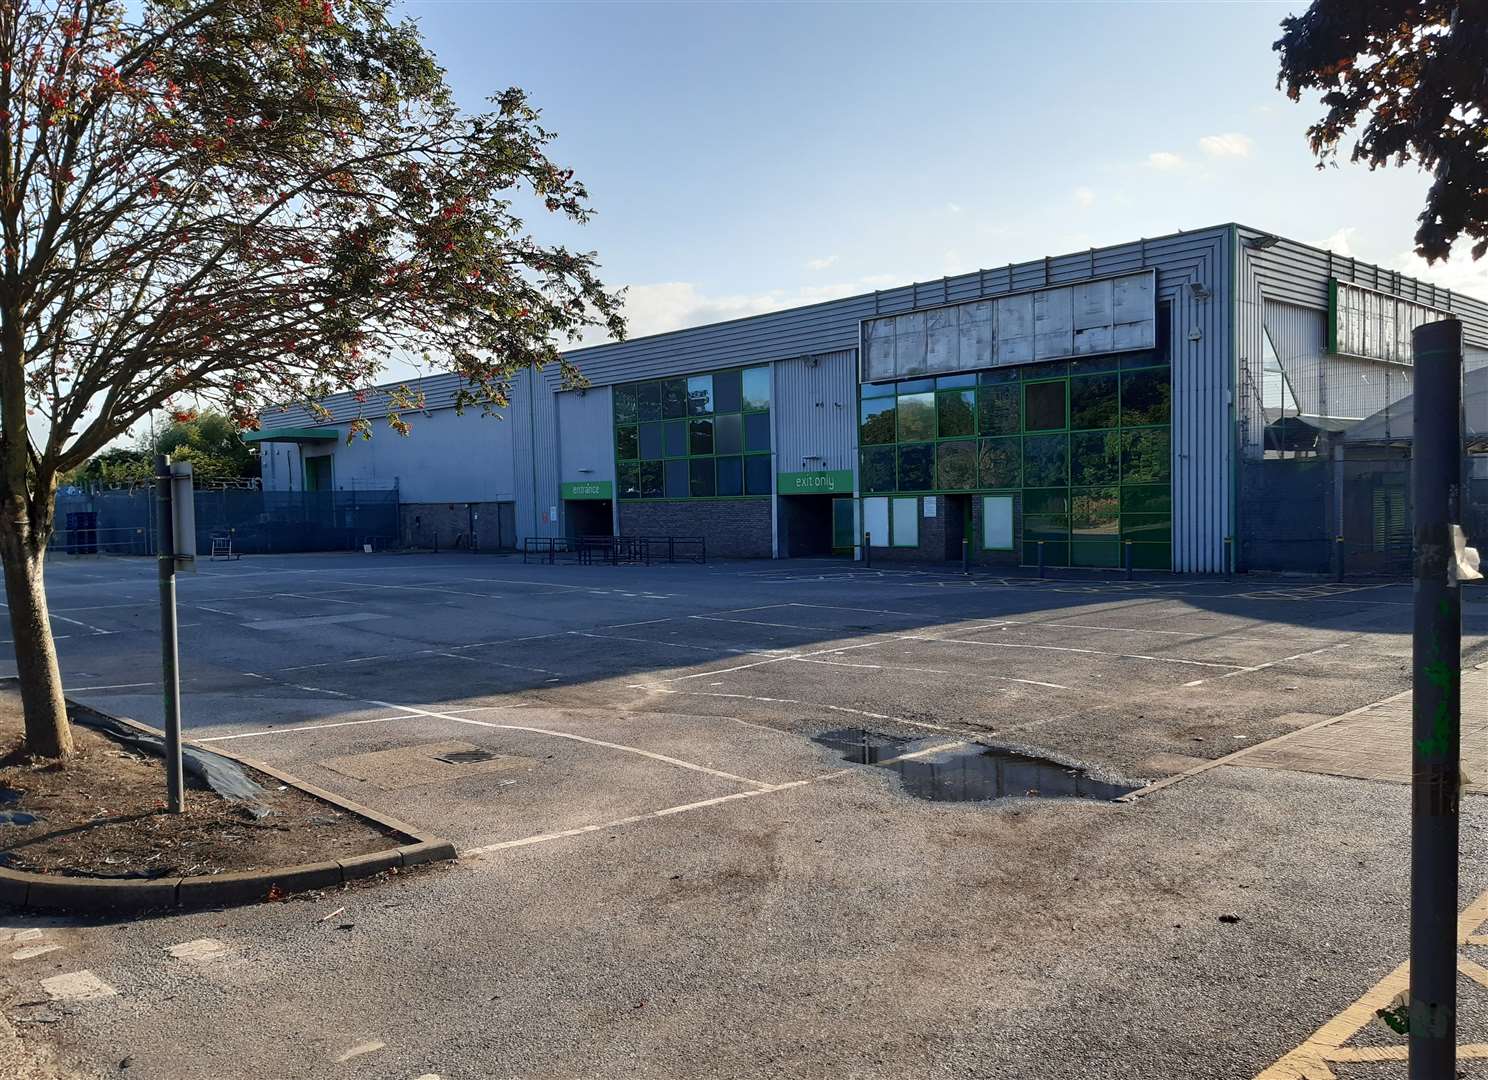 B&M have announced plans to takeover a disused Homebase site near Dartford town centre